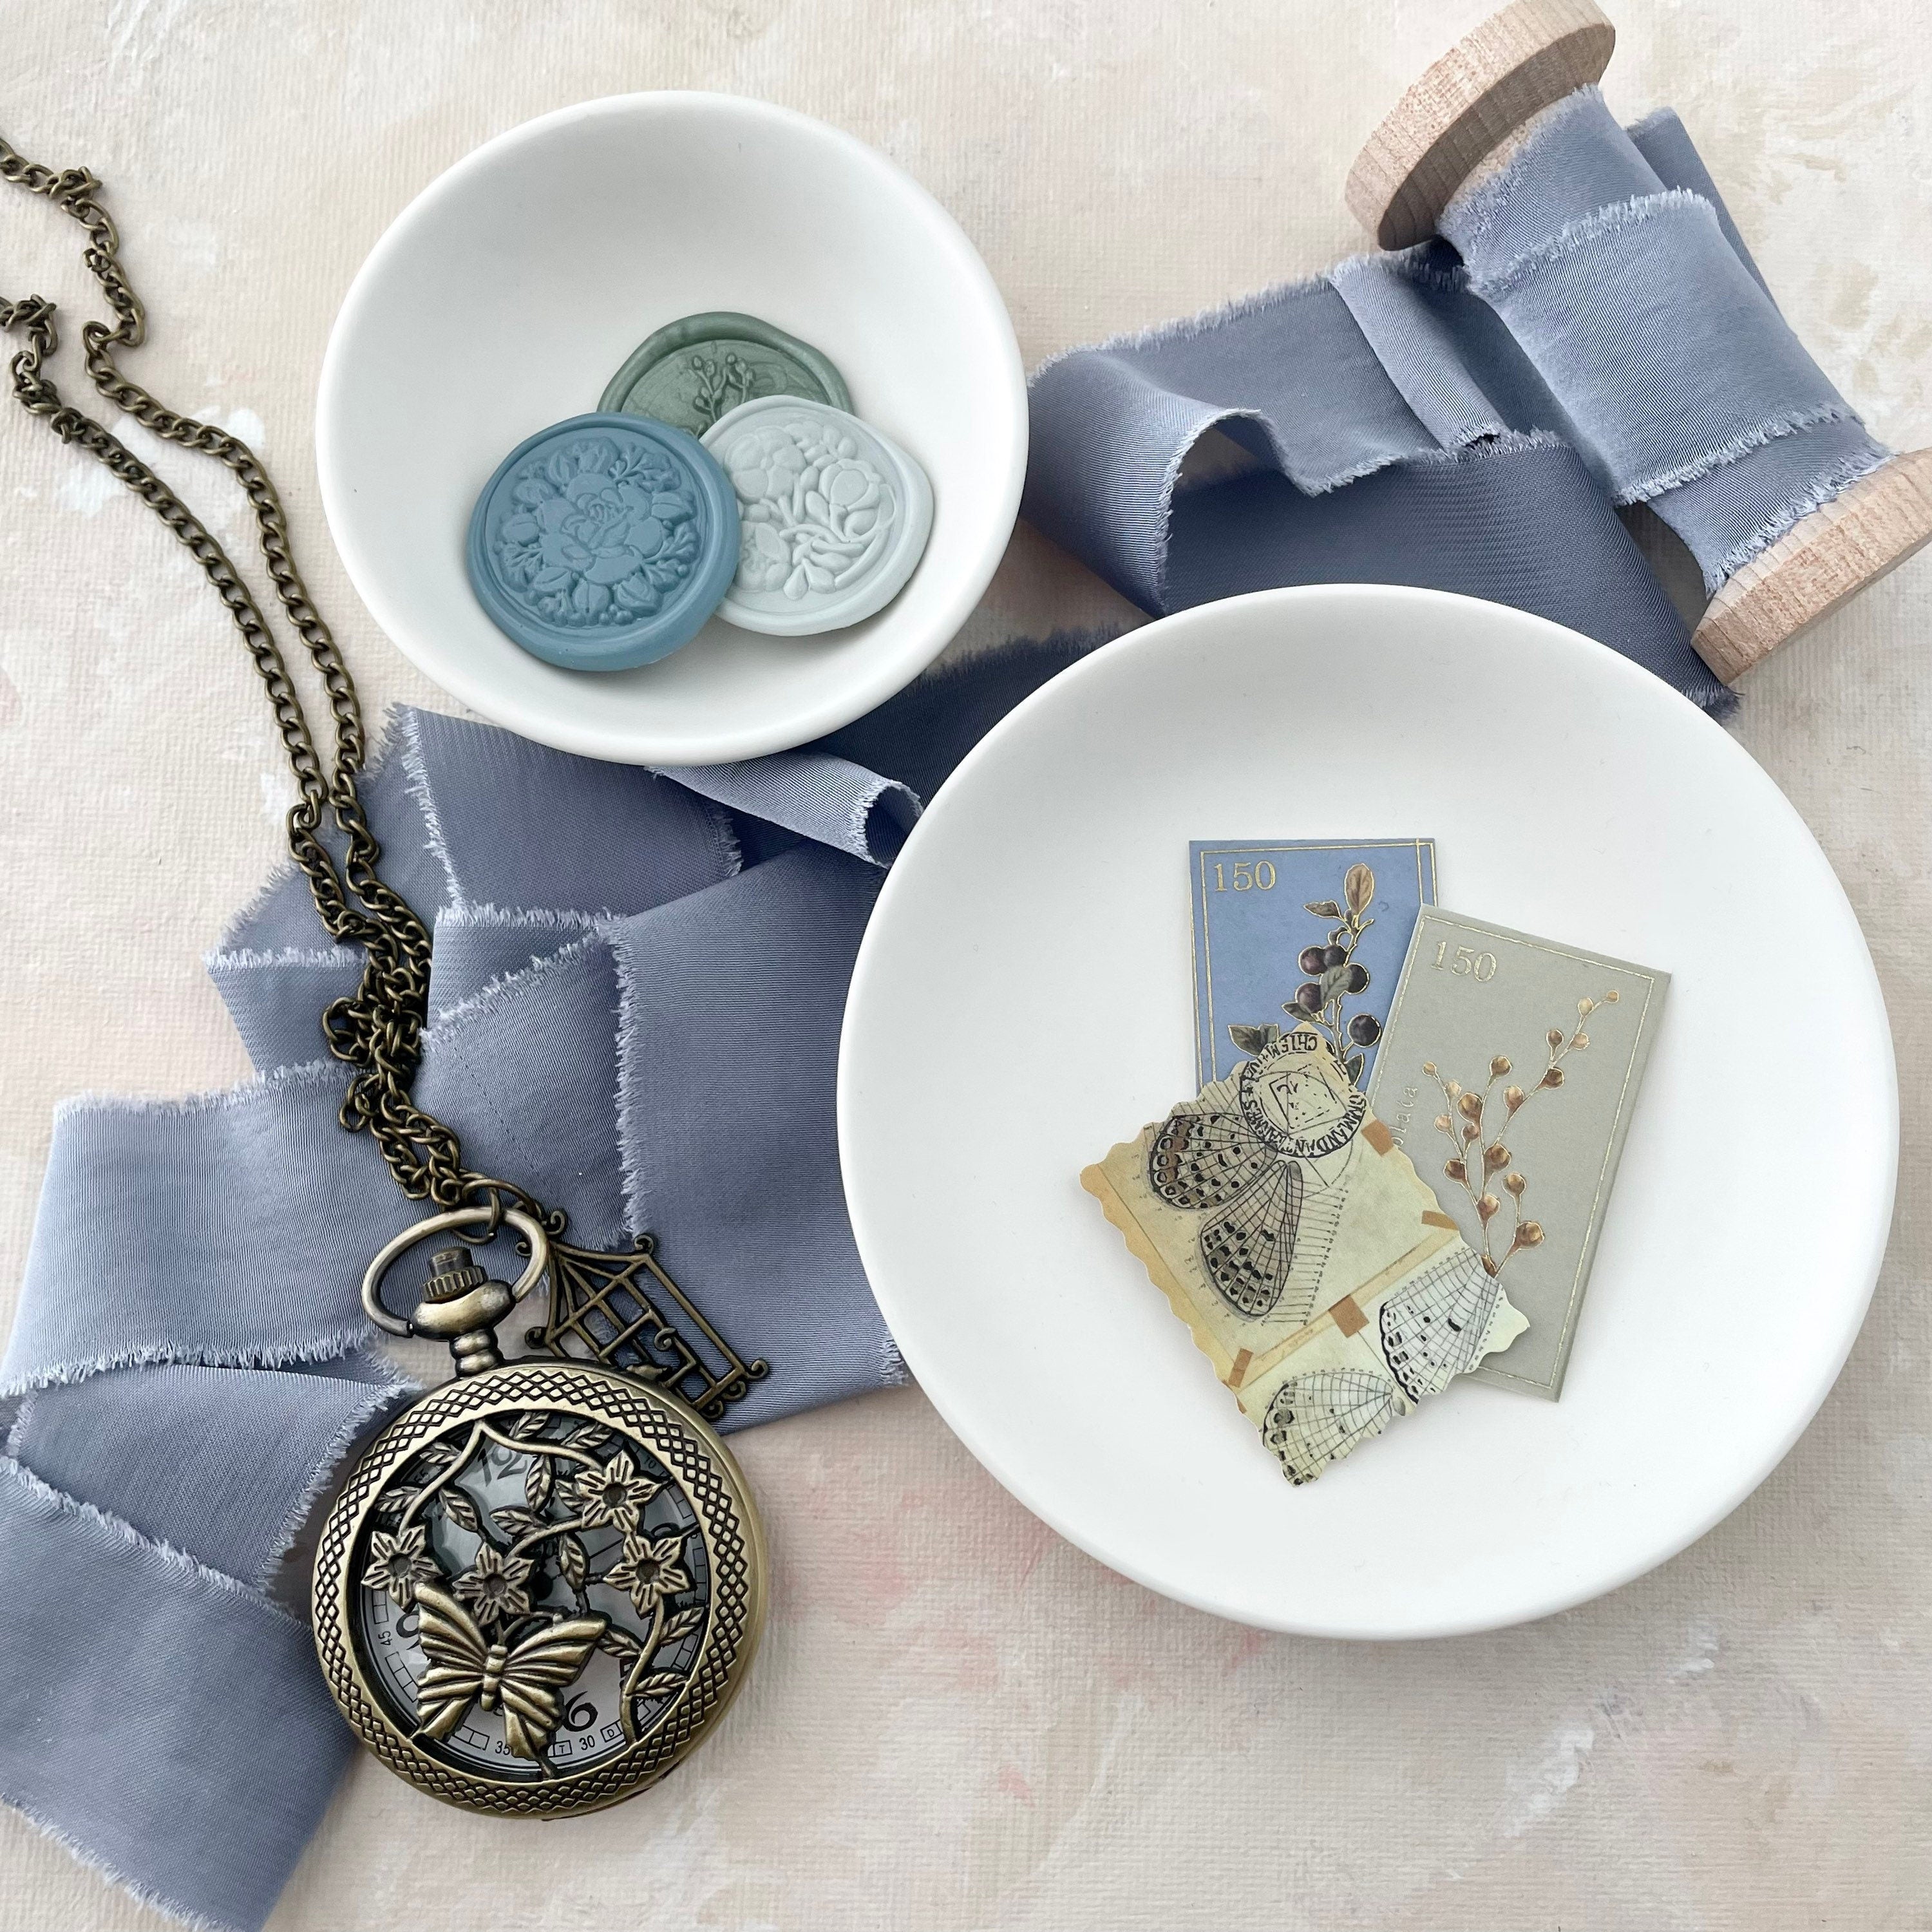 Dusty Blue Ribbon, styled with 3 wax seals in white tray, 3 vintage stamps, and vintage pocket watch - wedding flat lay props from Champagne & GRIT